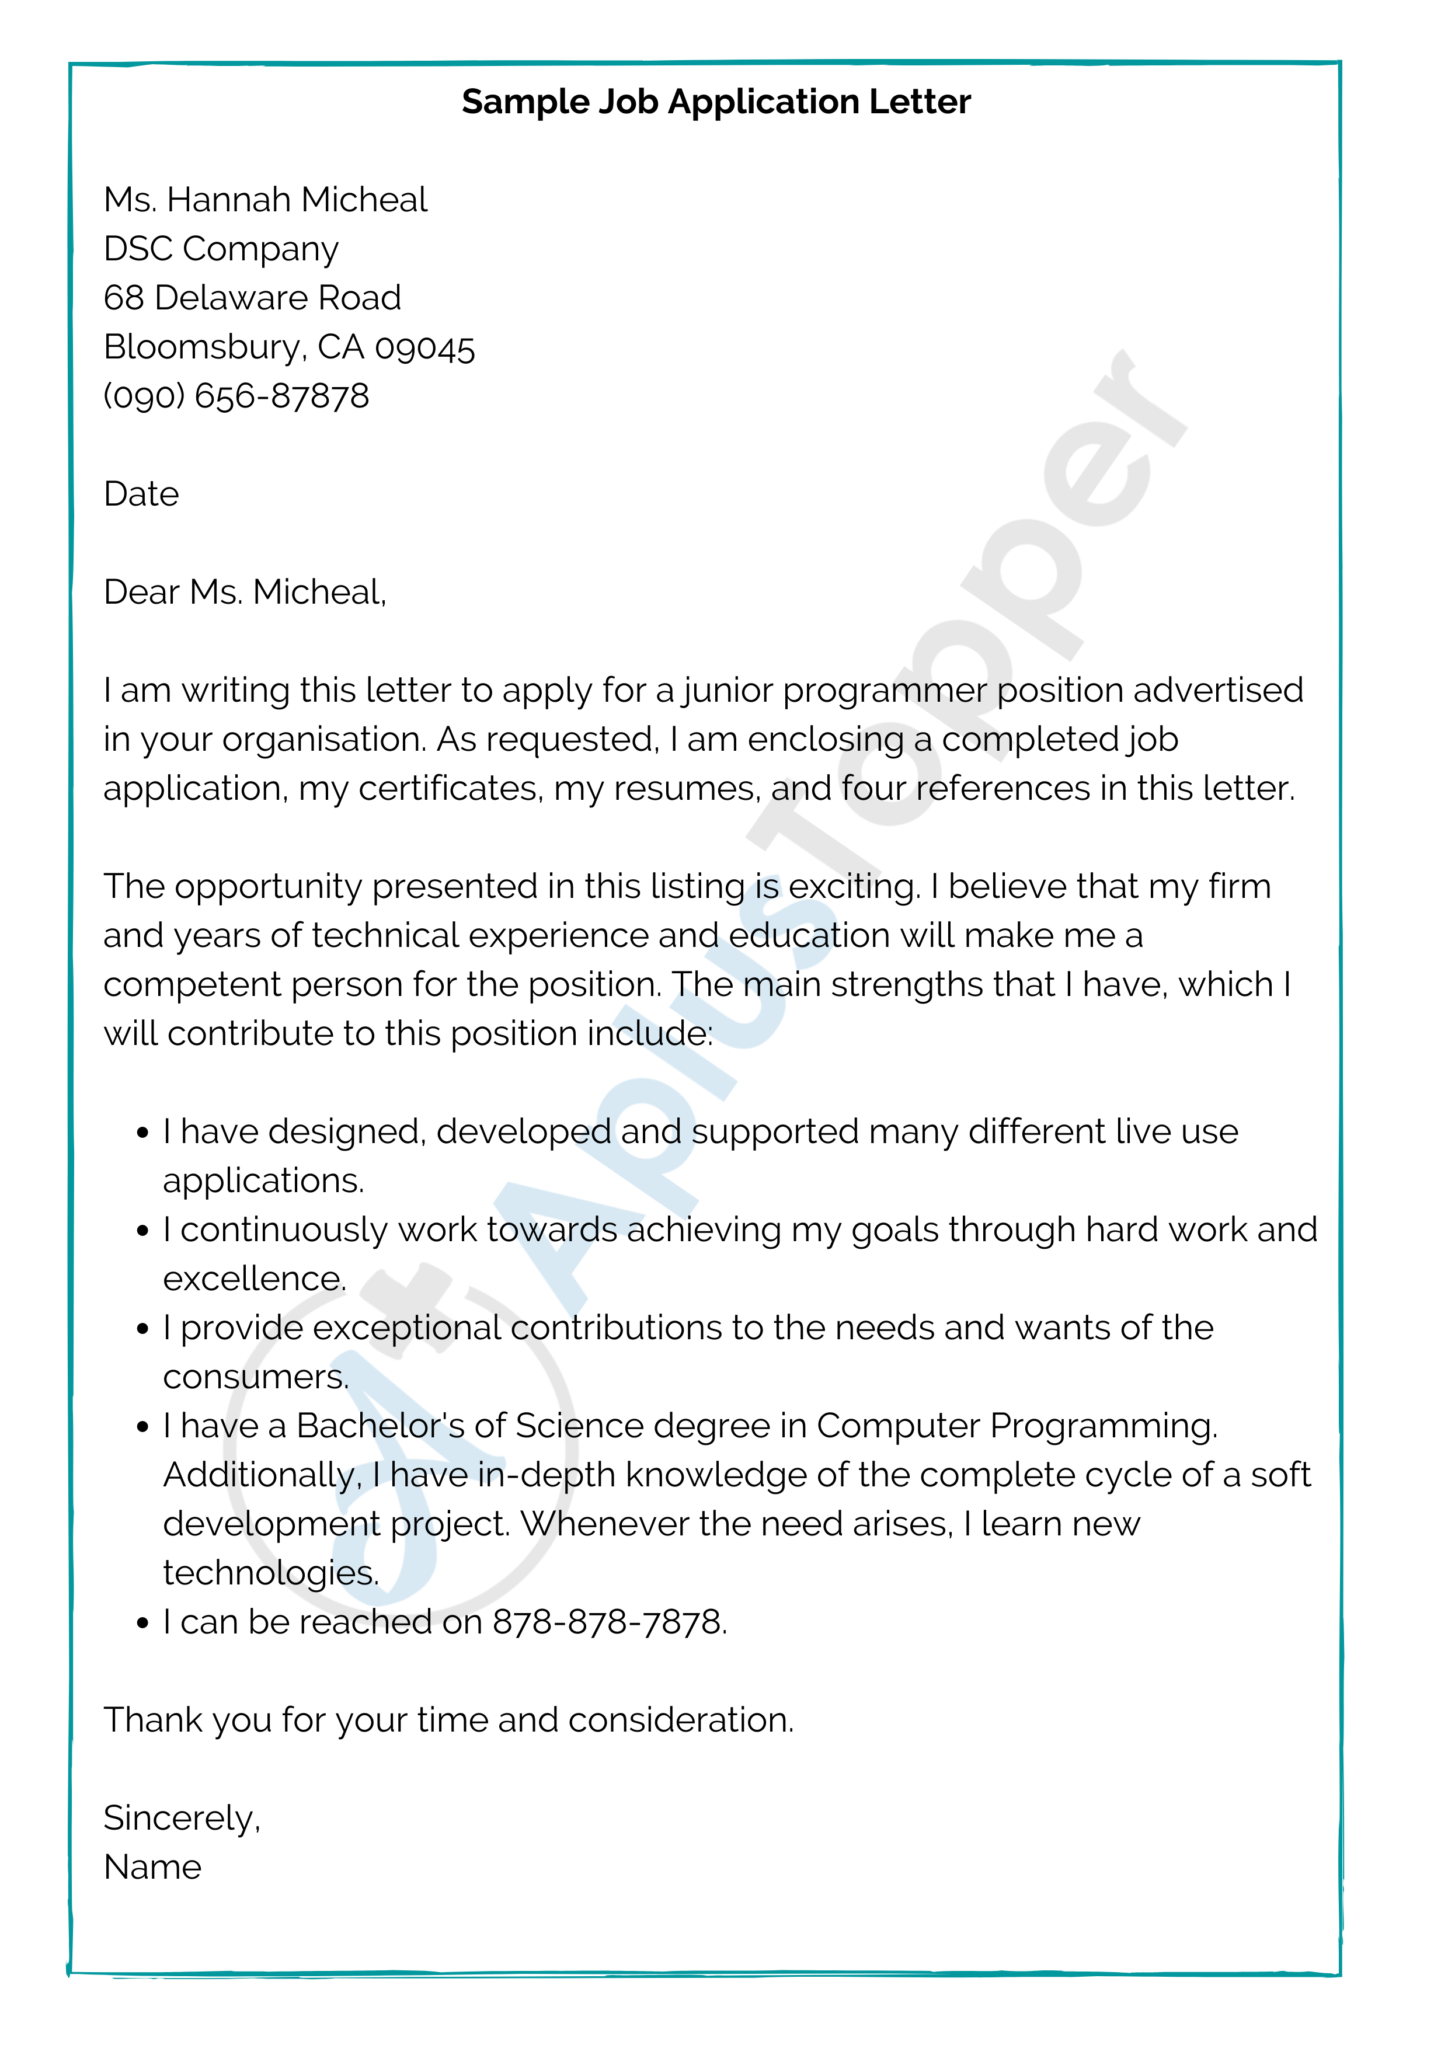 perfect example of an application letter